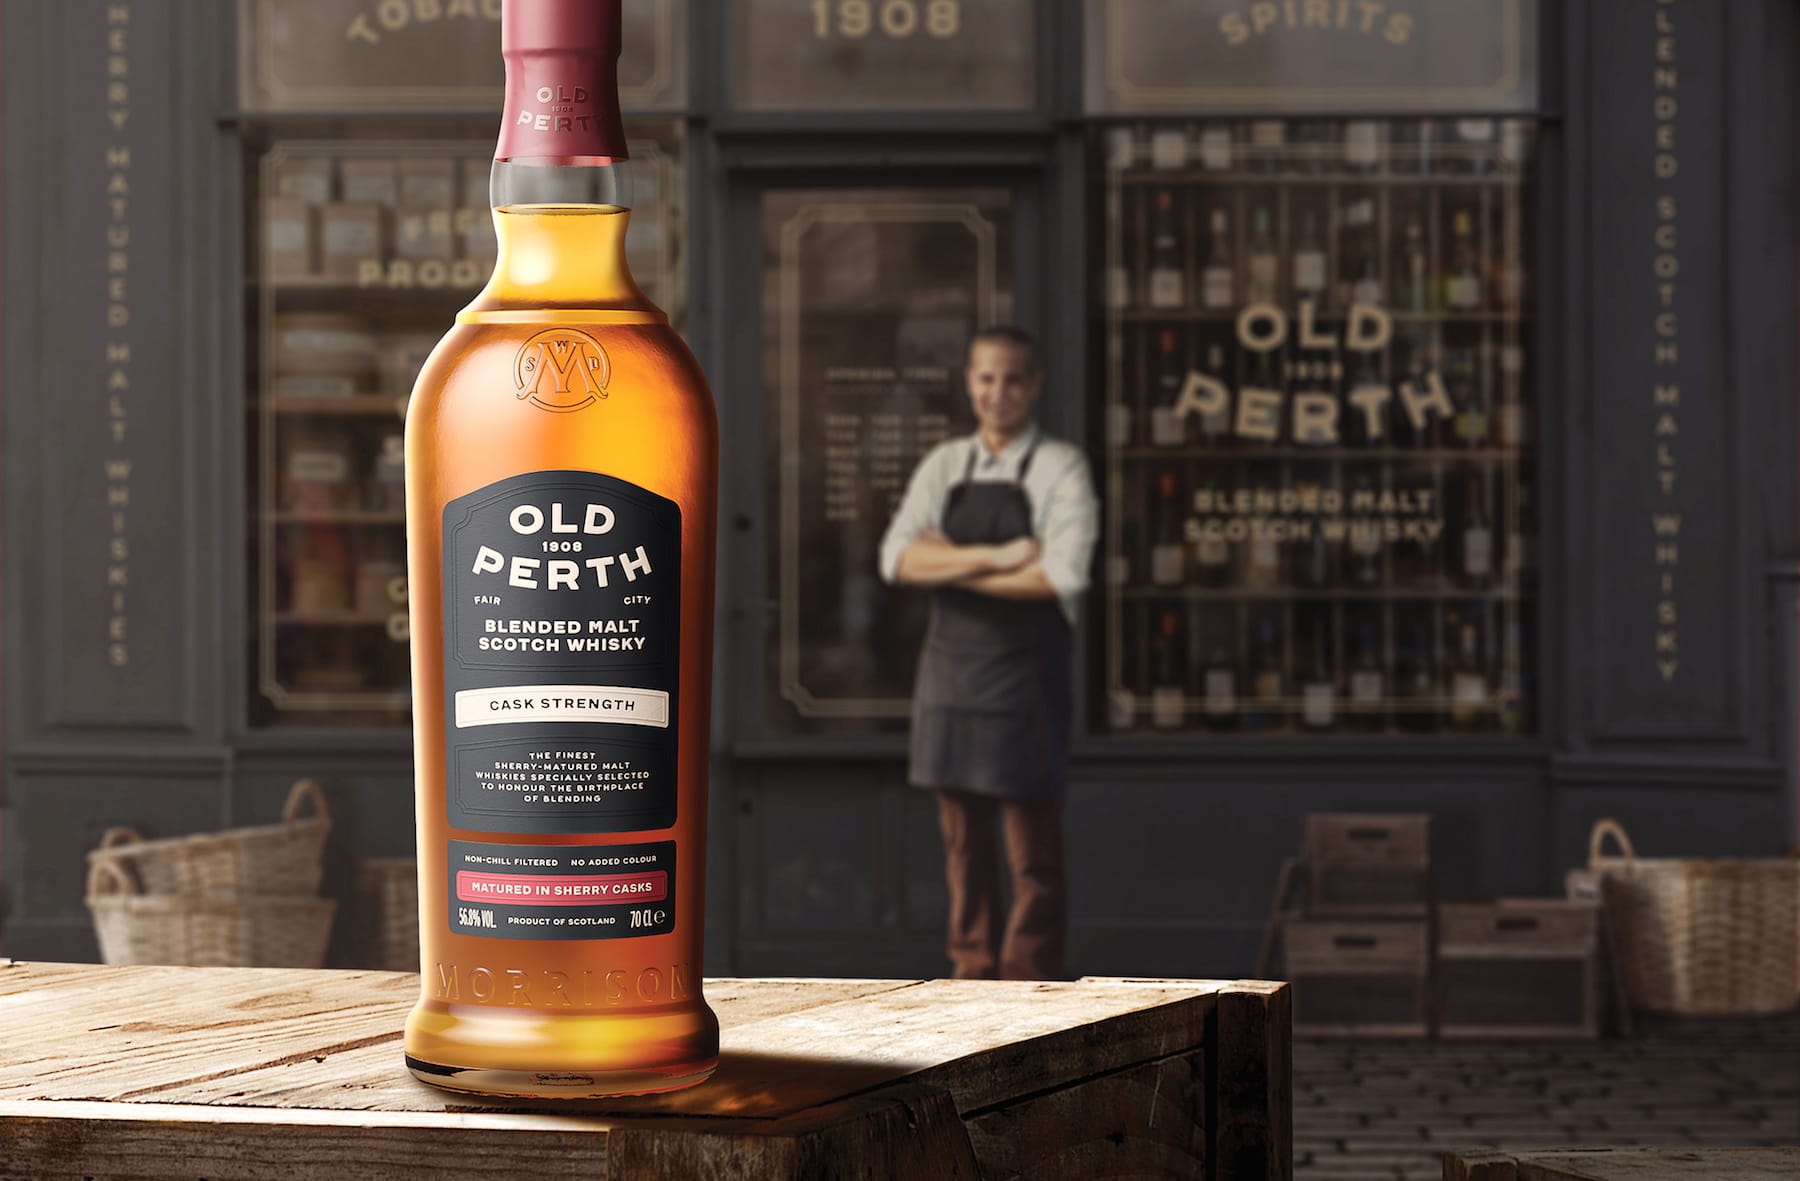 Old Perth Cask Strength Review and Tasting Notes